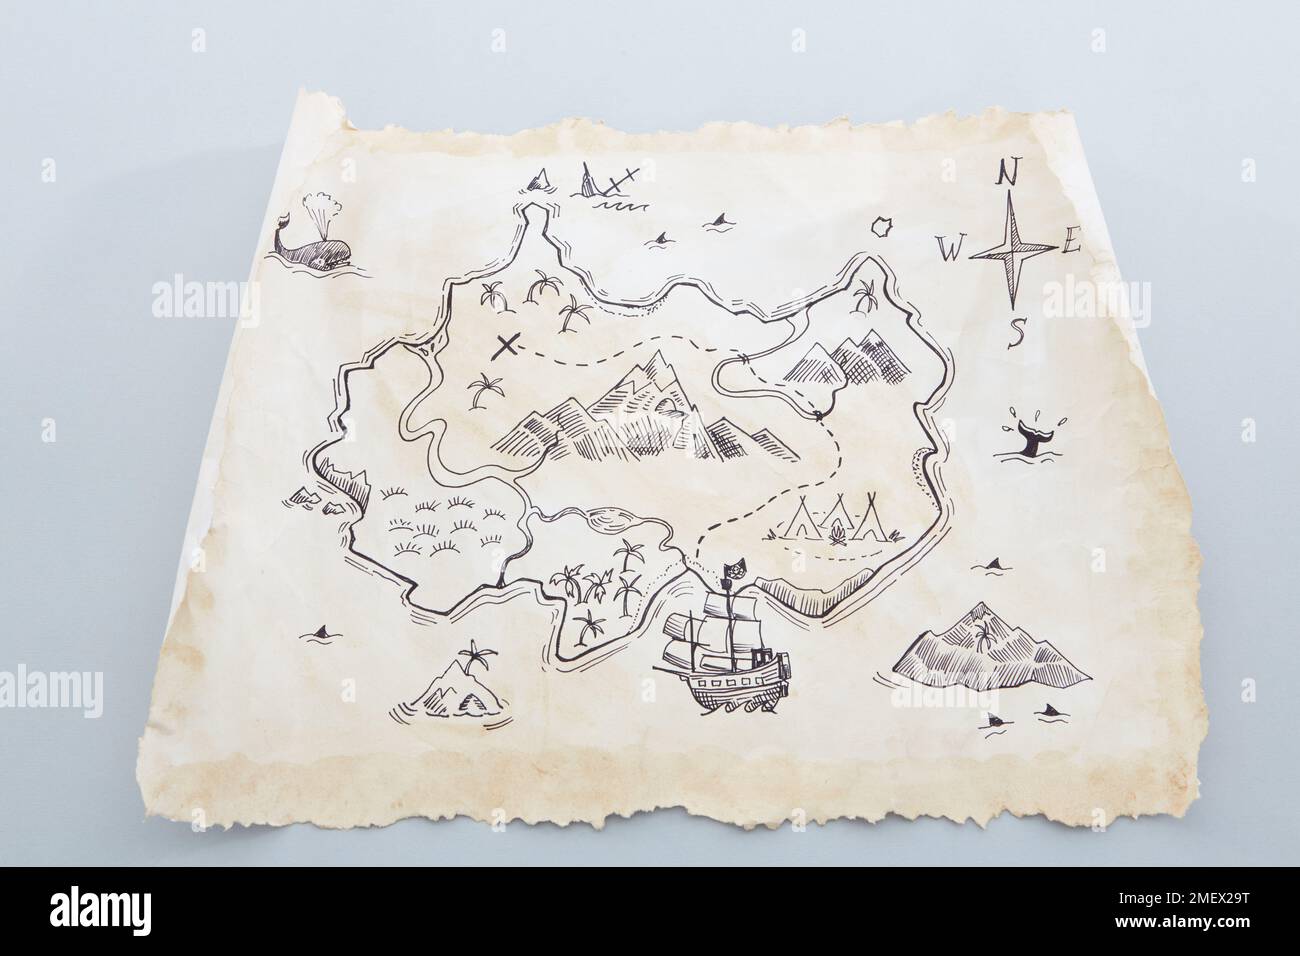 Treasure island map hi-res stock photography and images - Alamy